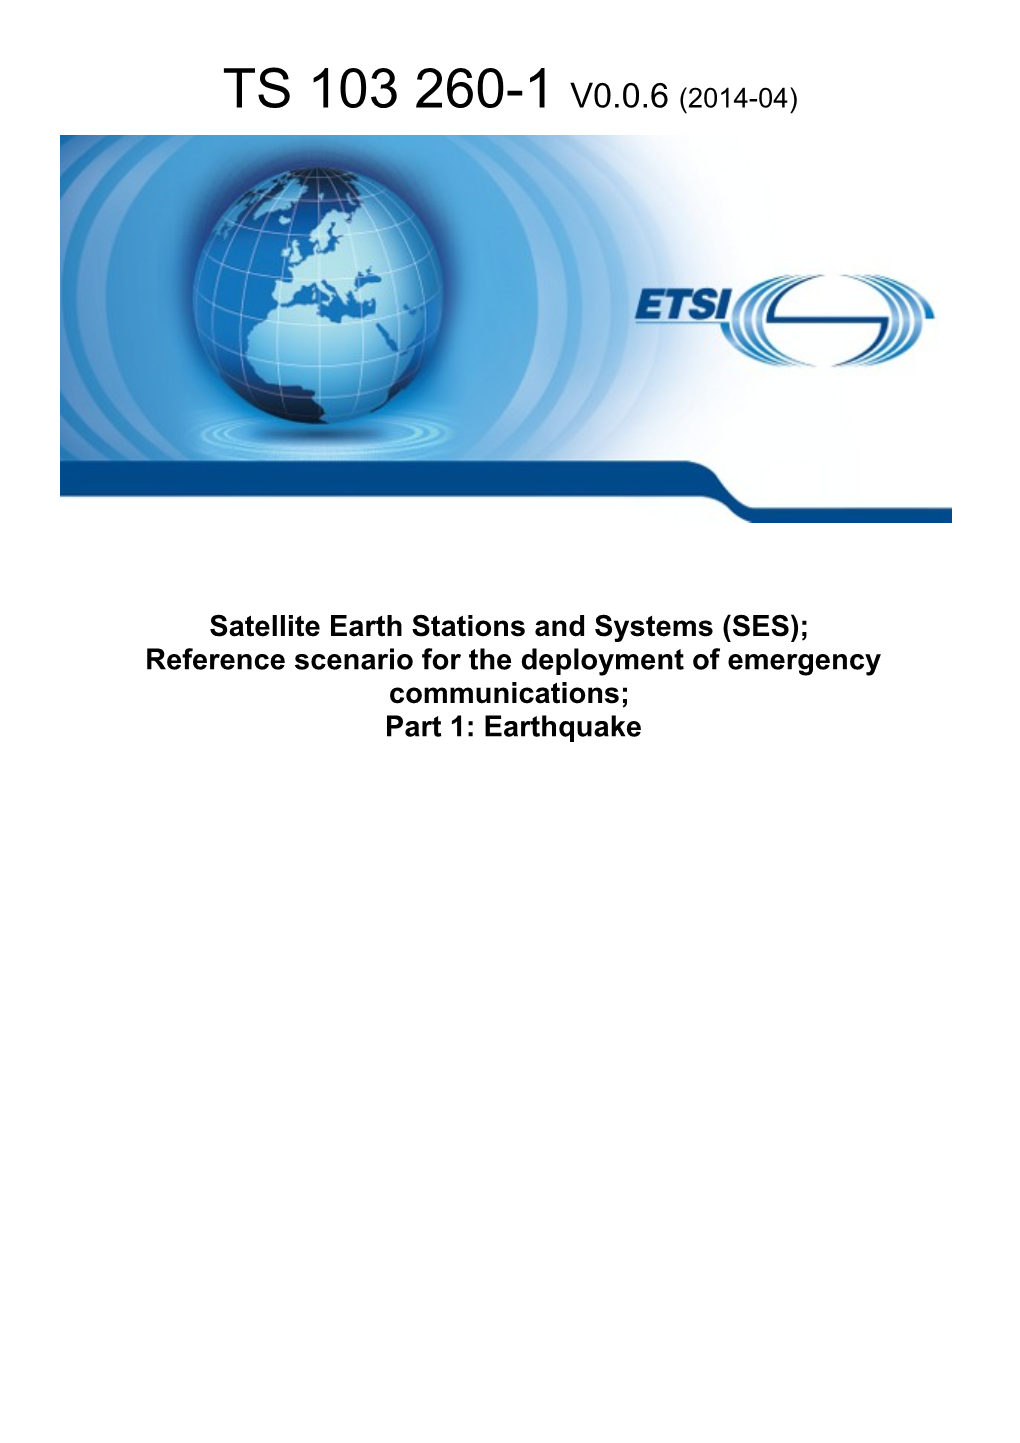 Satellite Earth Stations and Systems (SES);